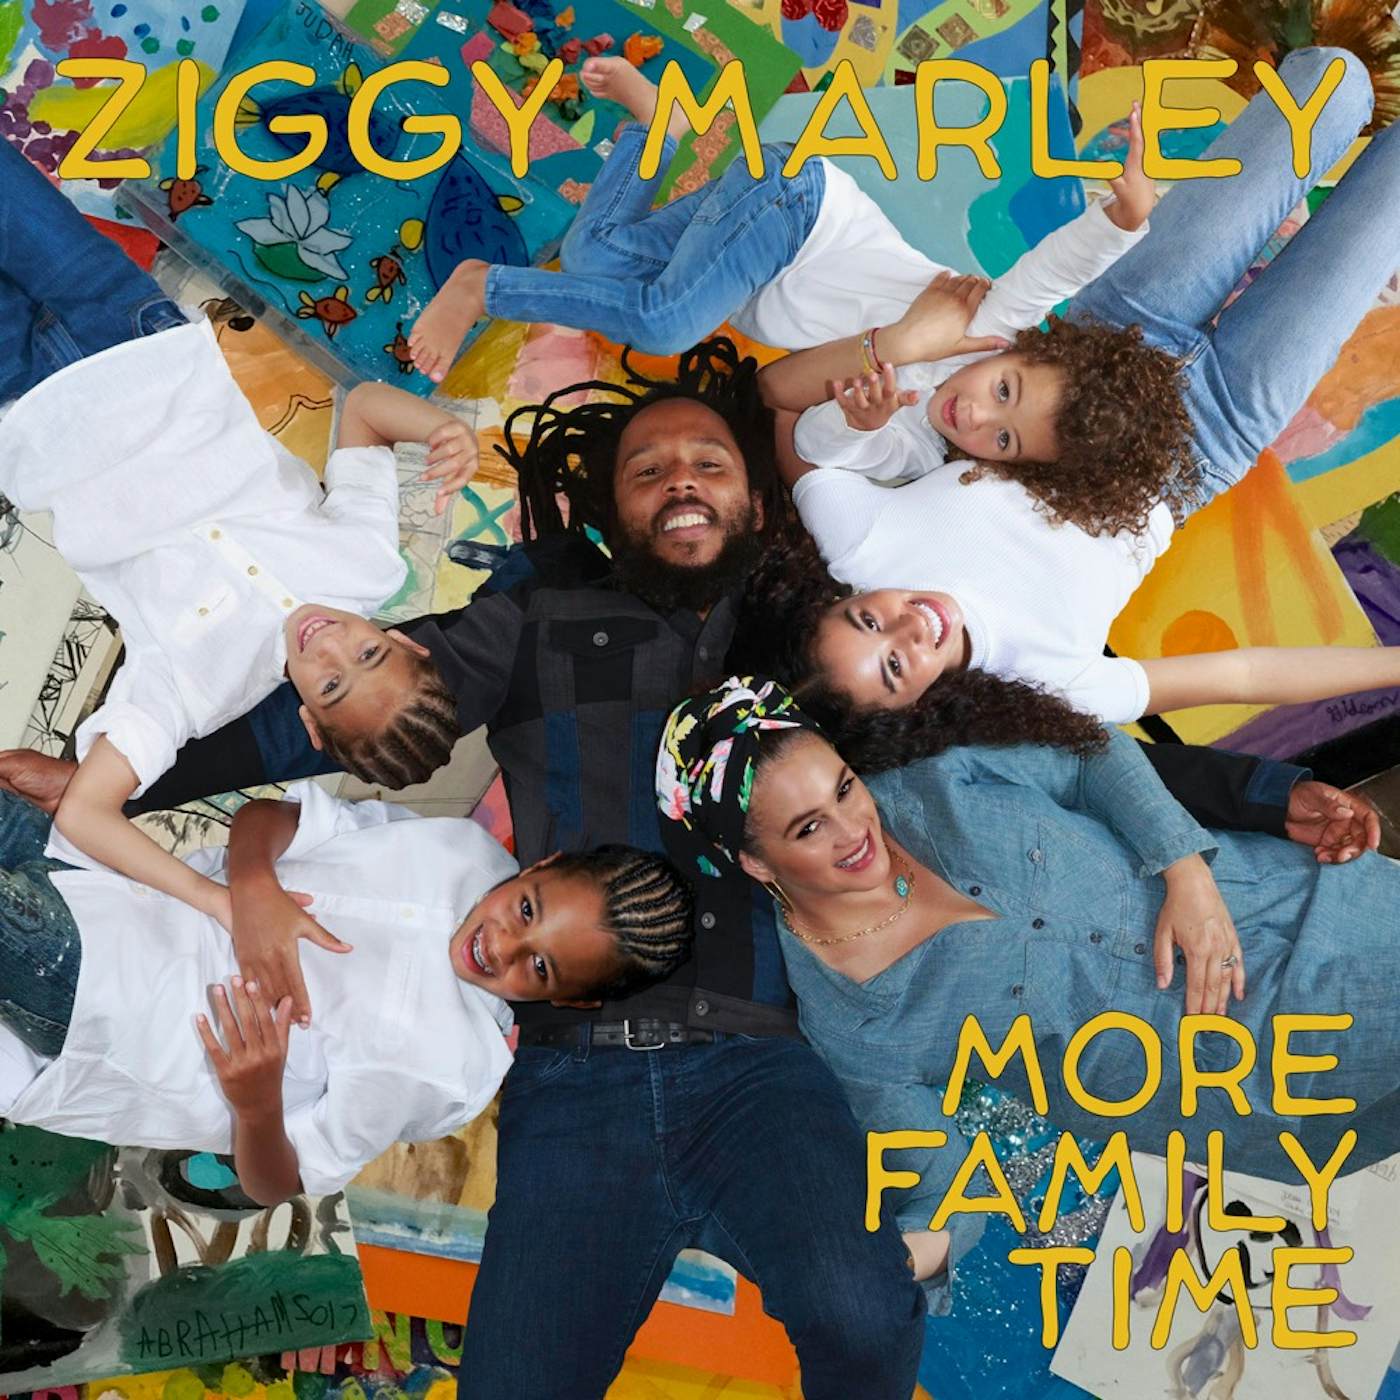 Ziggy Marley MORE FAMILY TIME CD